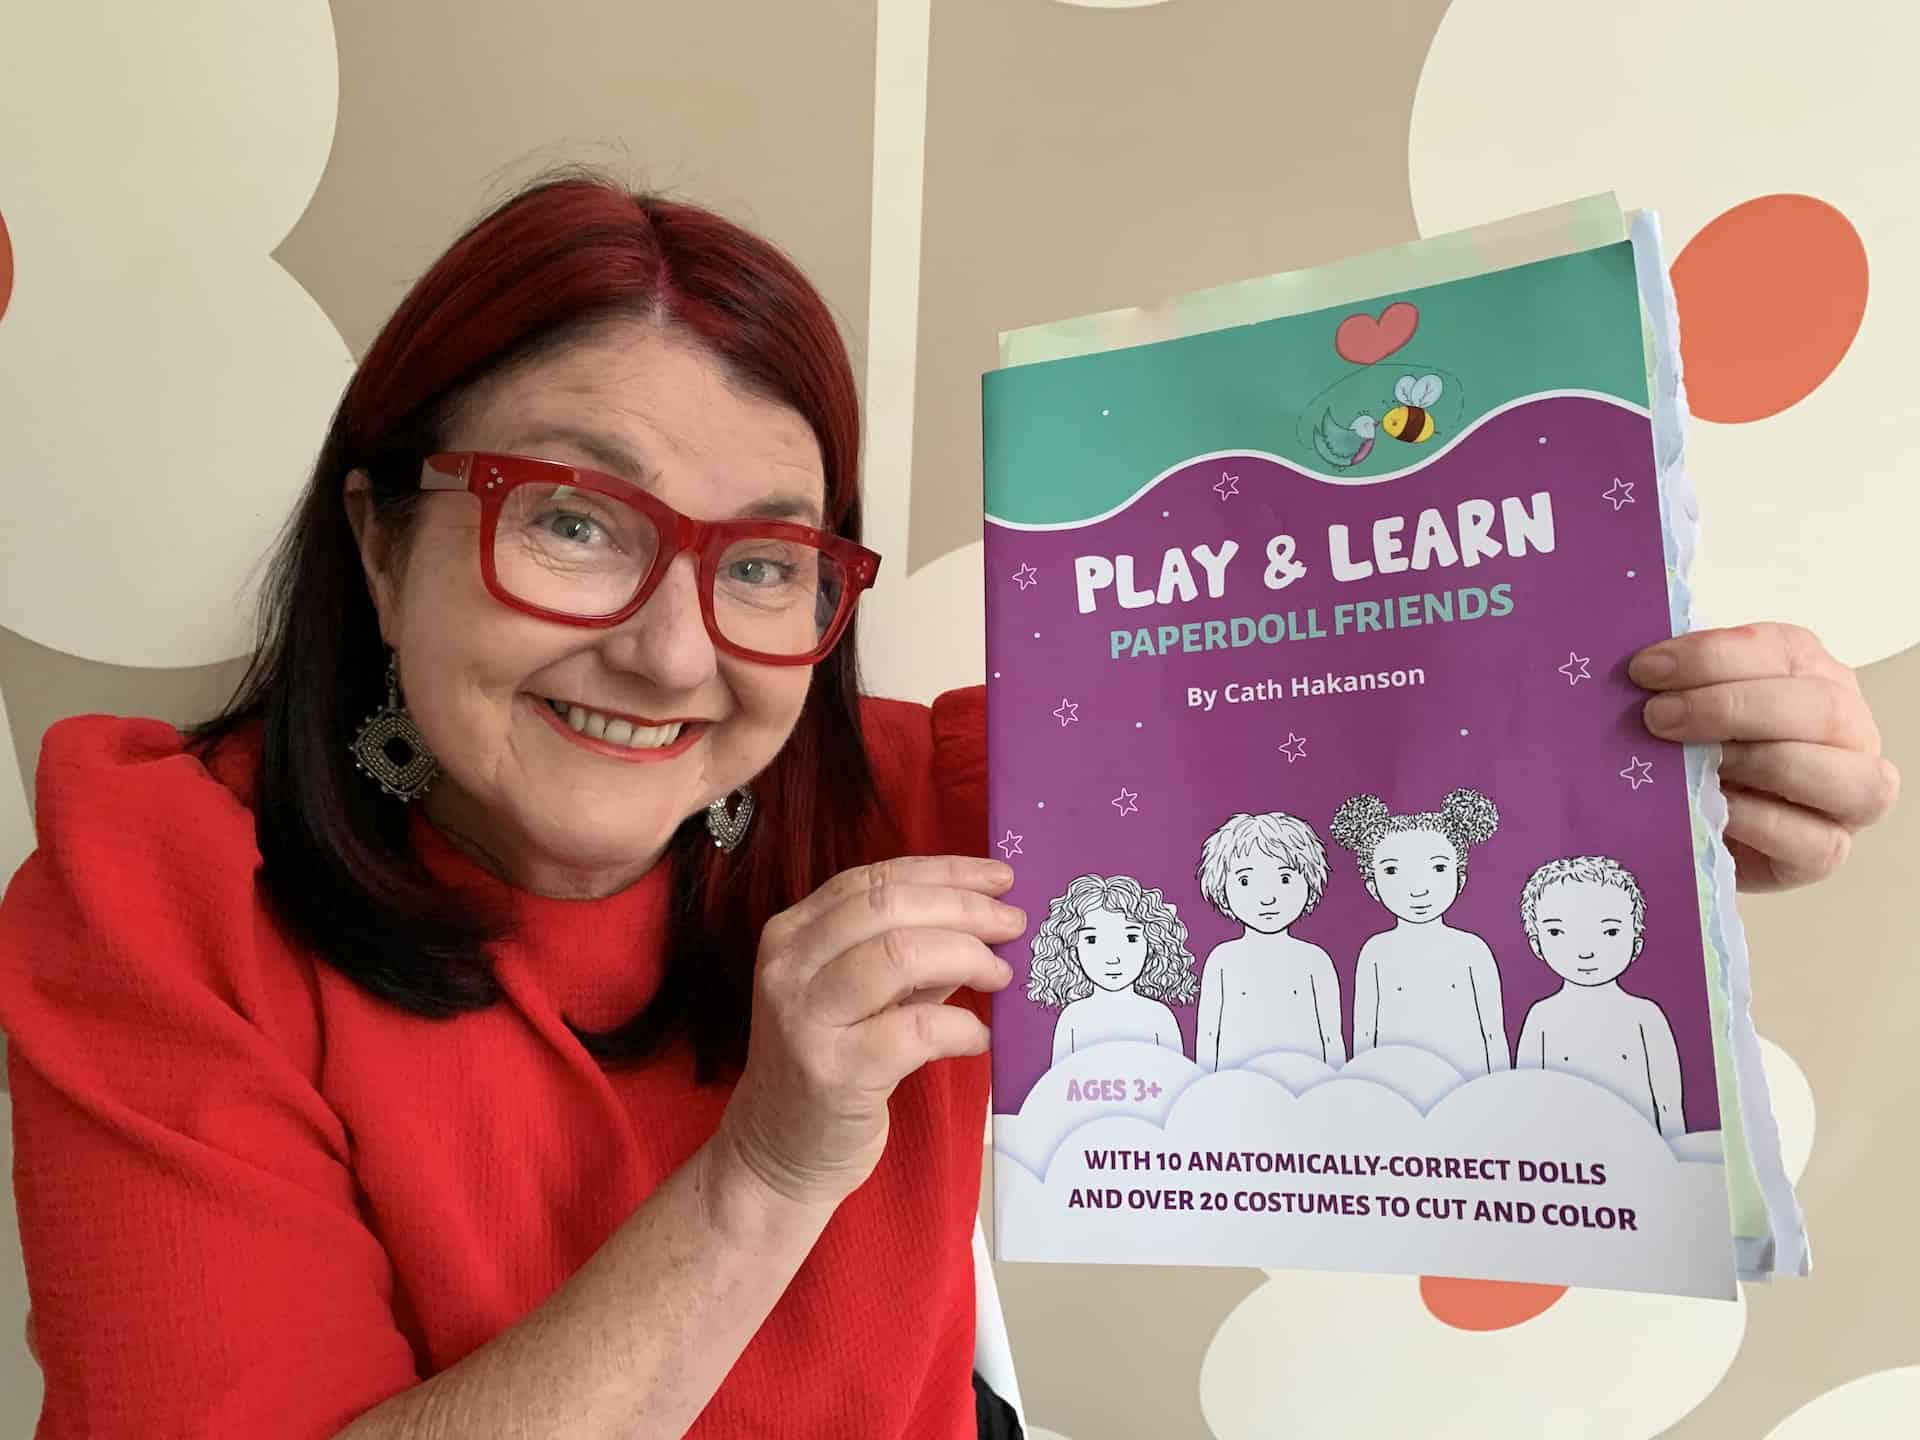 Play and Learn Paperdoll Friends - Book review by Rowena Thomas | 'Amazing Me'